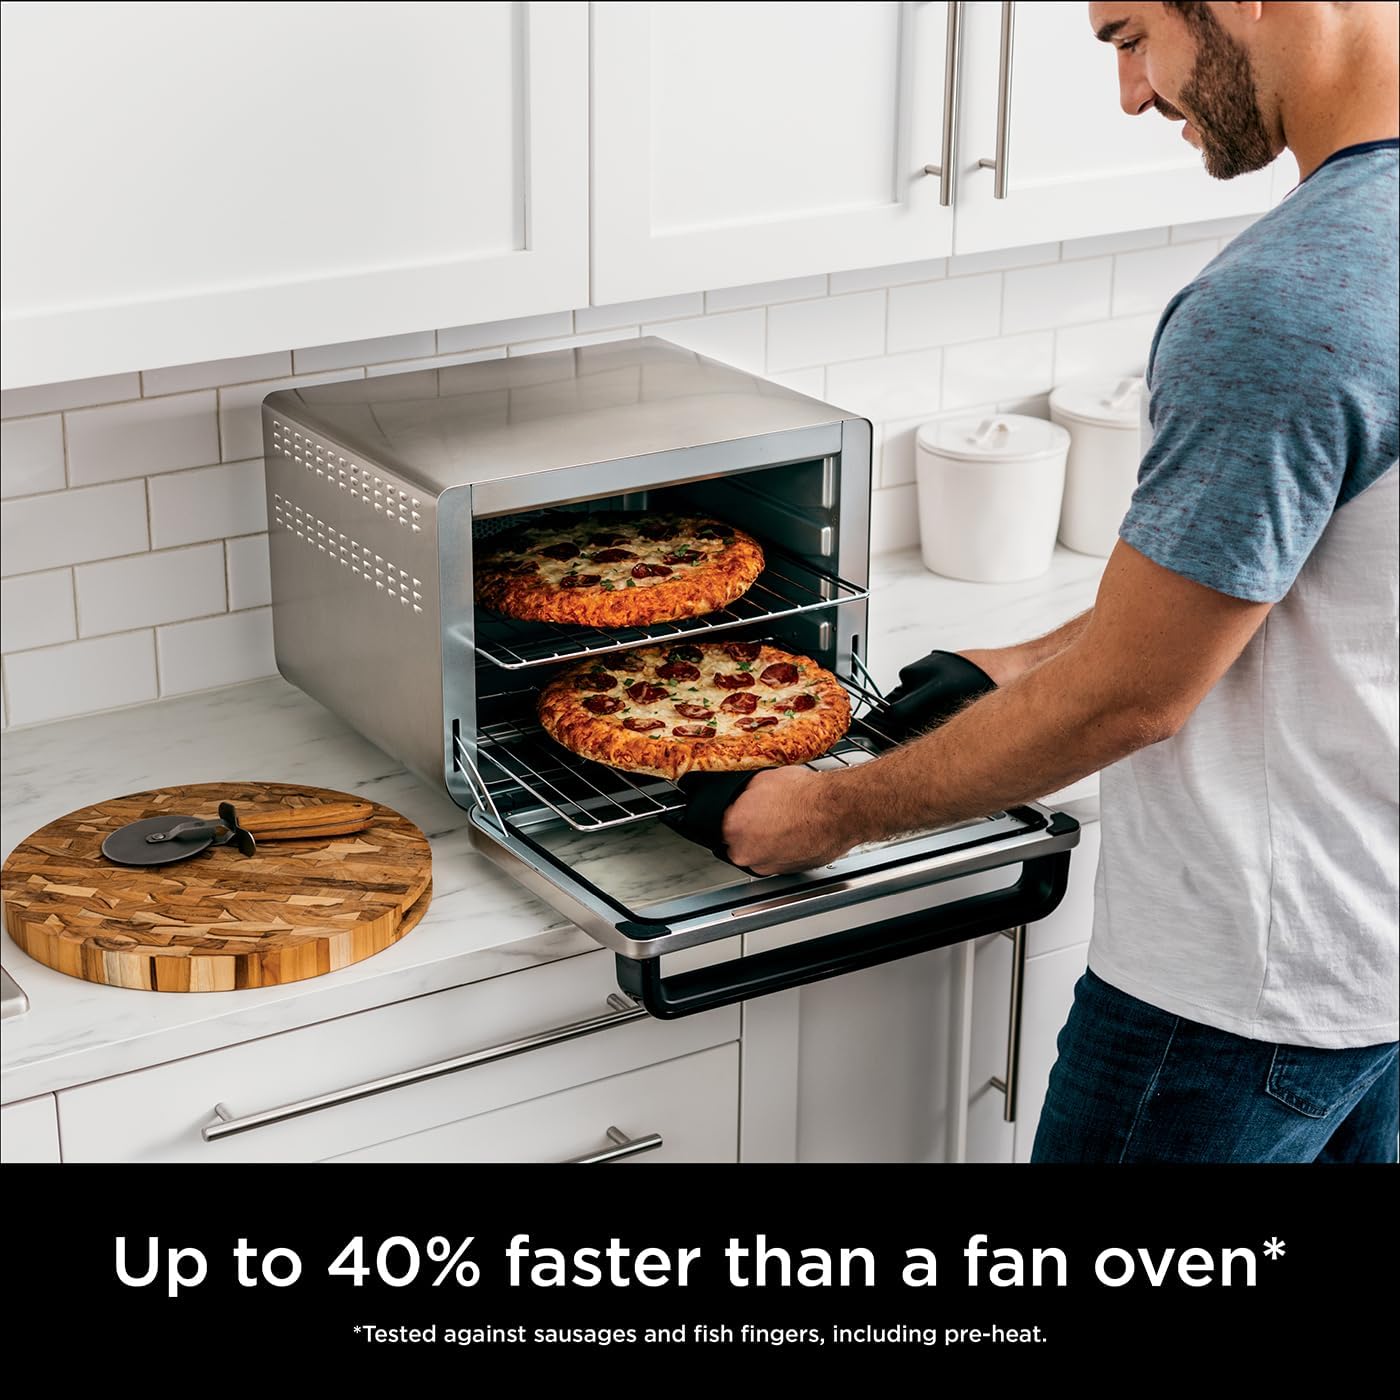 Ninja Foodi 10 - in - 1 Multifunction Oven, Fast Mini Oven, Countertop Oven, 10 Cooking Functions, Air Fry, Pizza, Grill, Roast, Bake, Toast, Bagel & more, Make Family - Size Meals, Silver/Black DT200UK - Amazing Gadgets Outlet